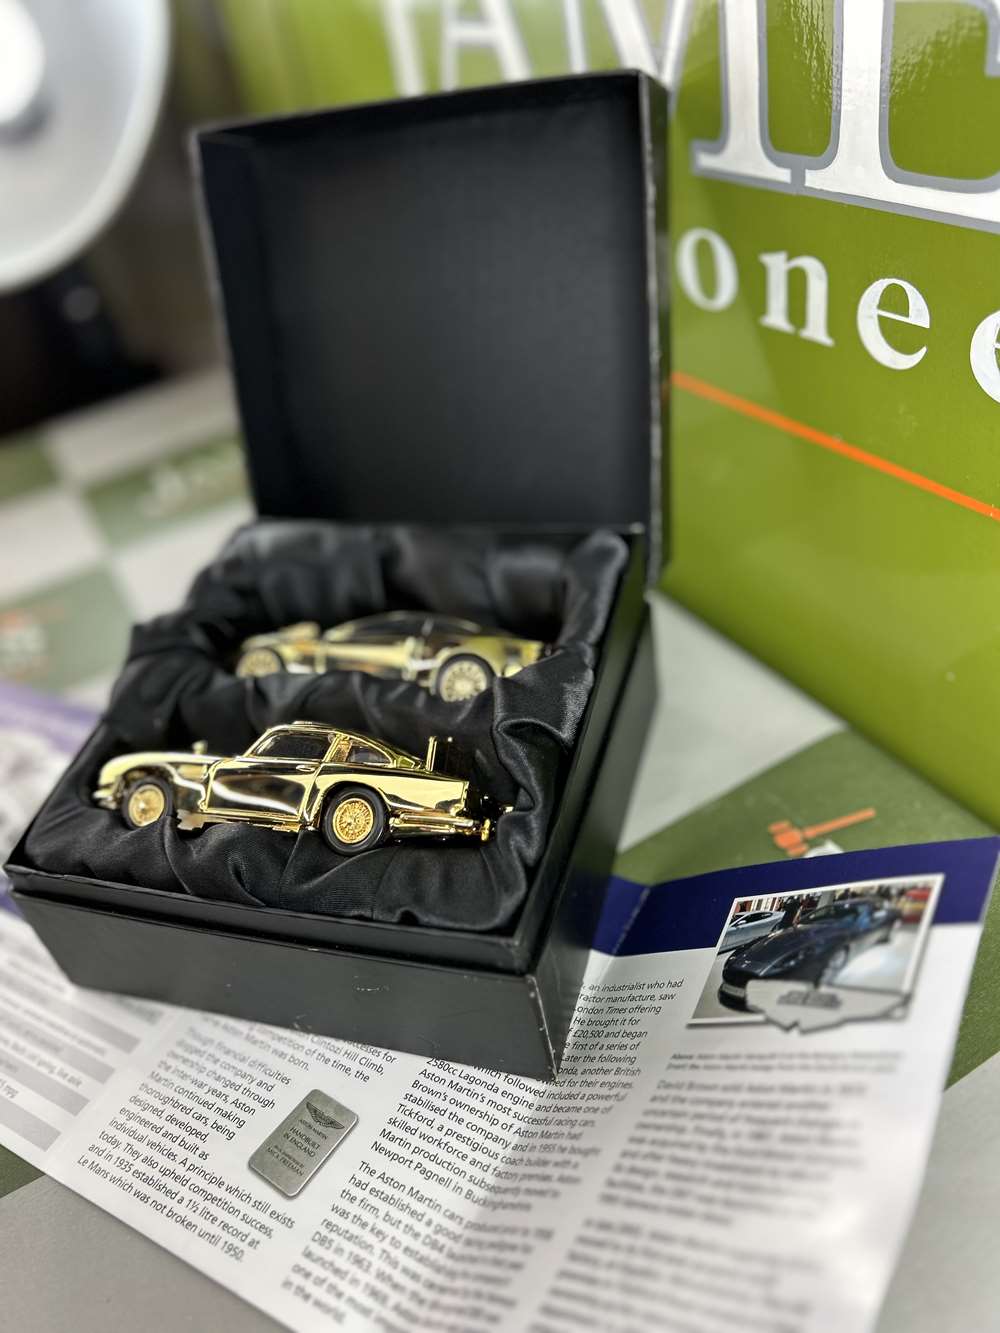 James Bond 007 Special Edition 40th Anniversary Gold Aston Martin`s - Image 6 of 7